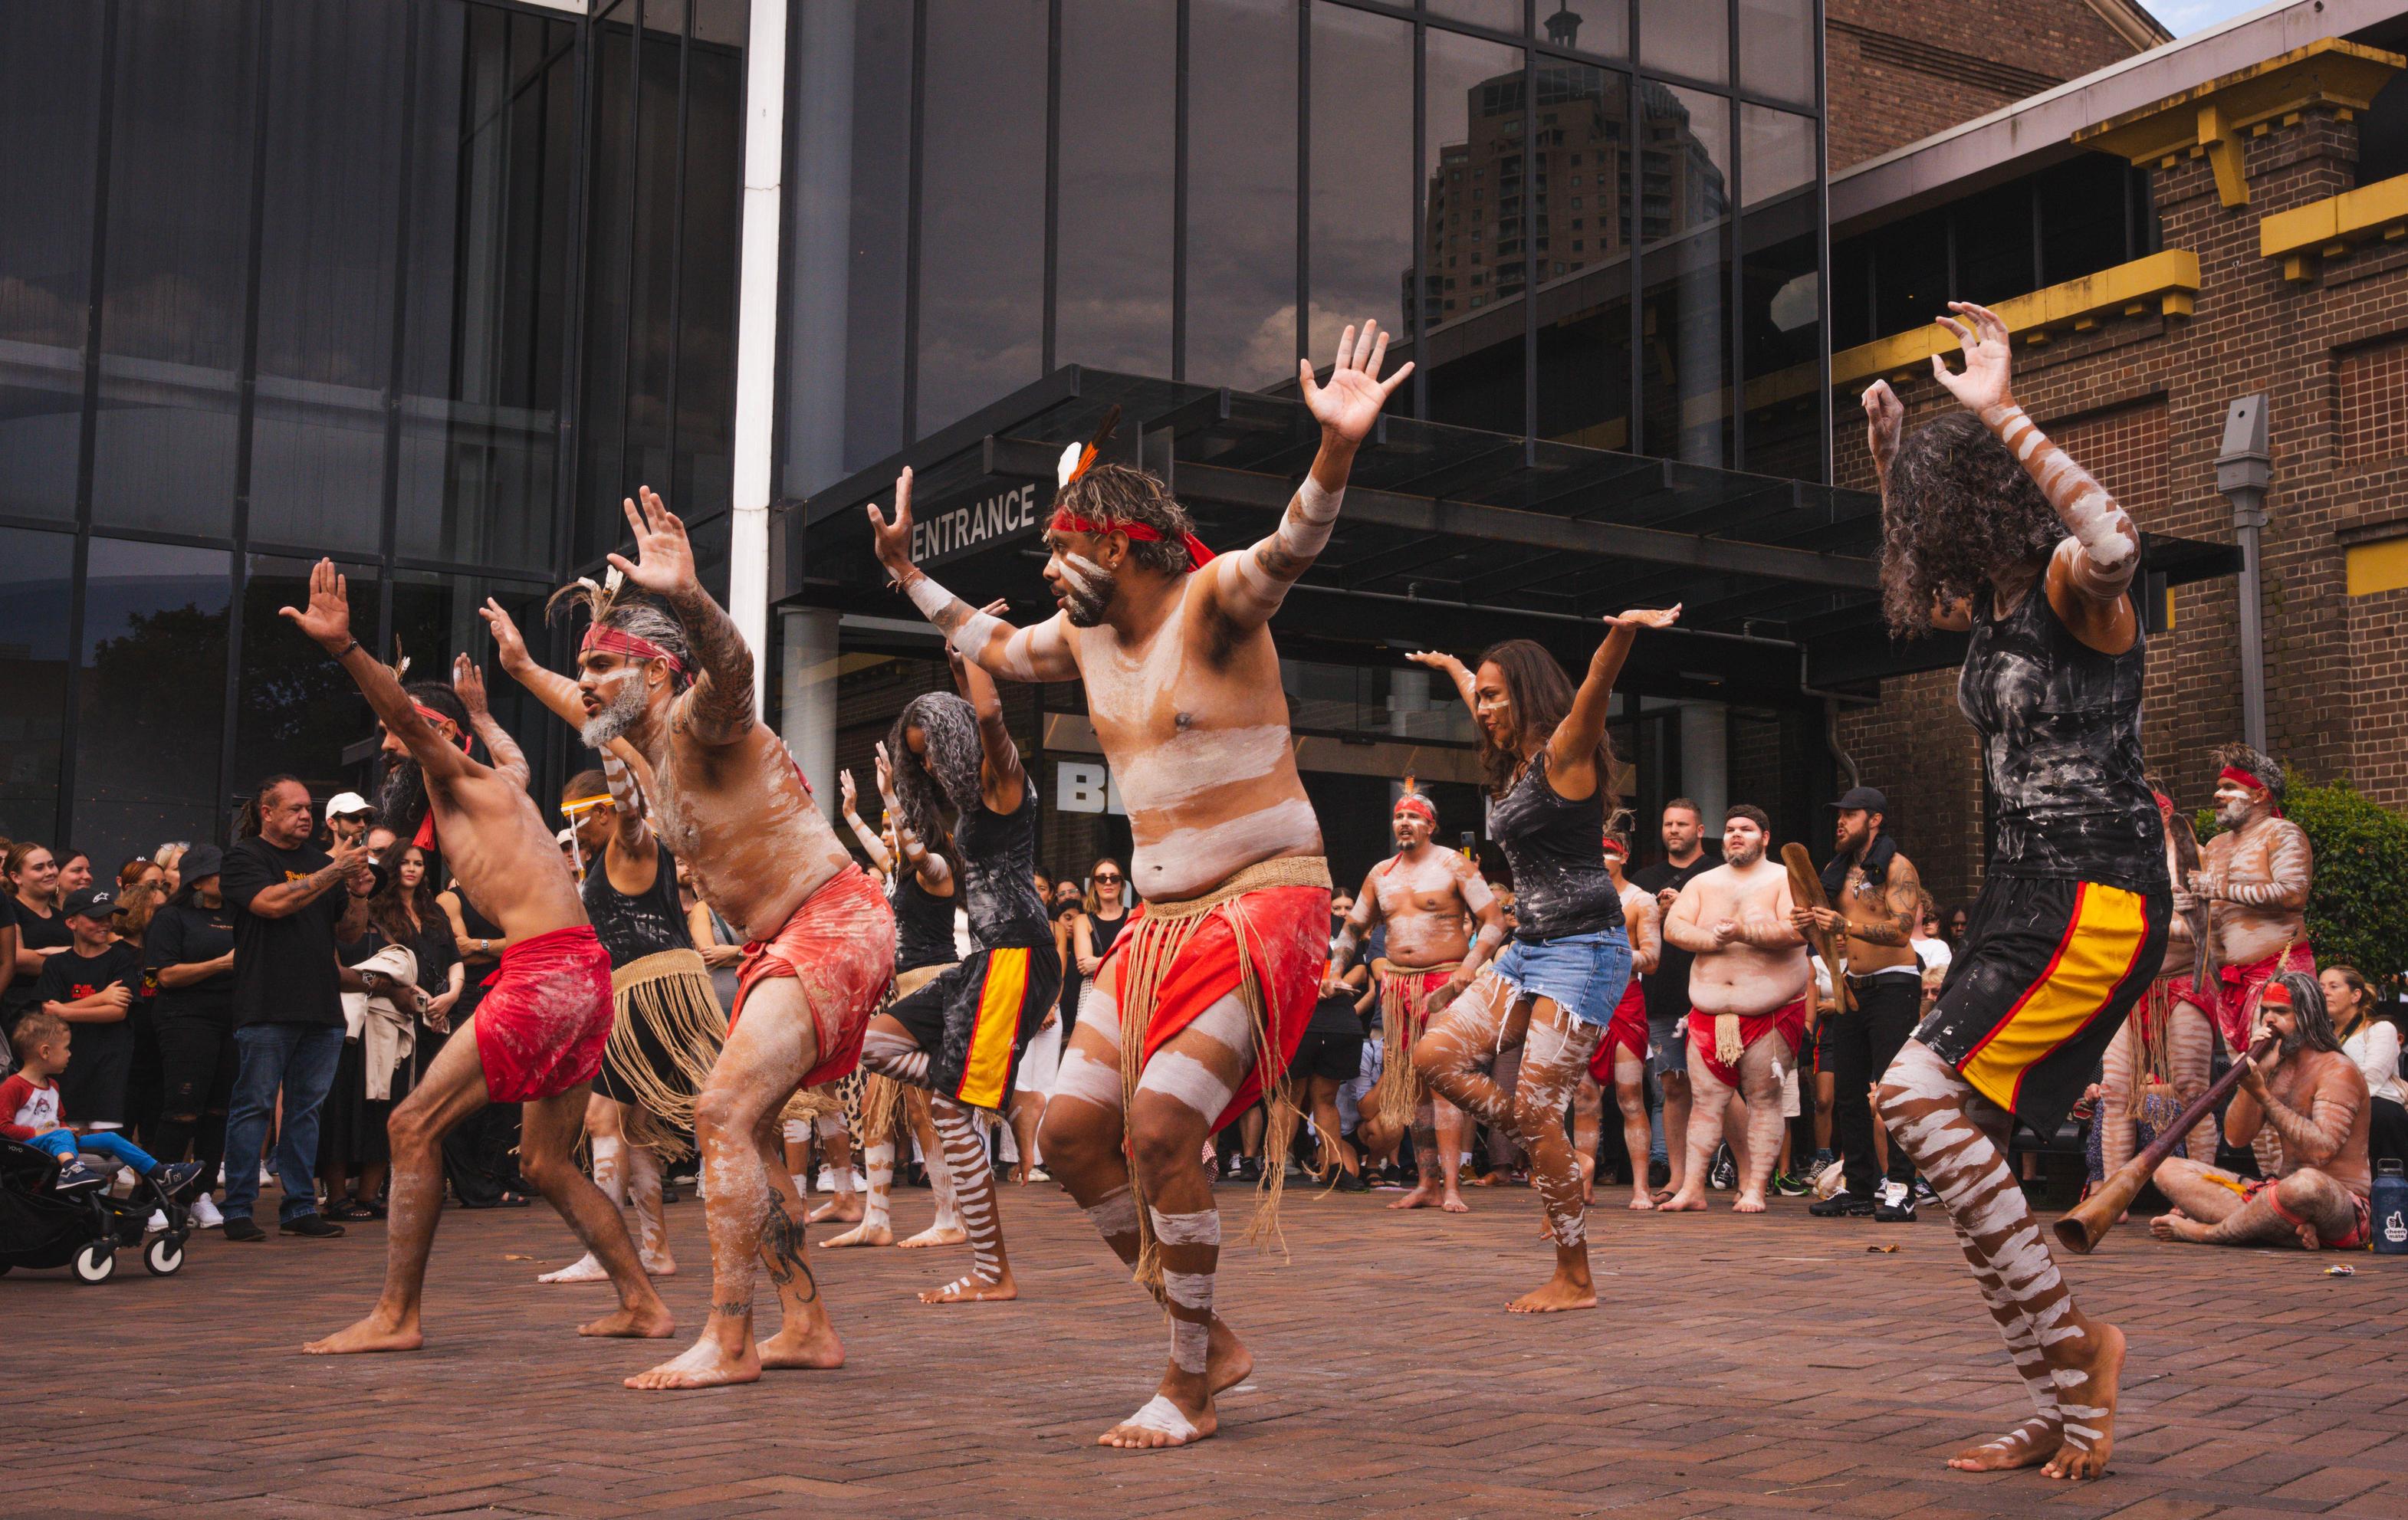 A group of First Nations performers in traditional dress, mid dance. They are outside with an audience watching them.